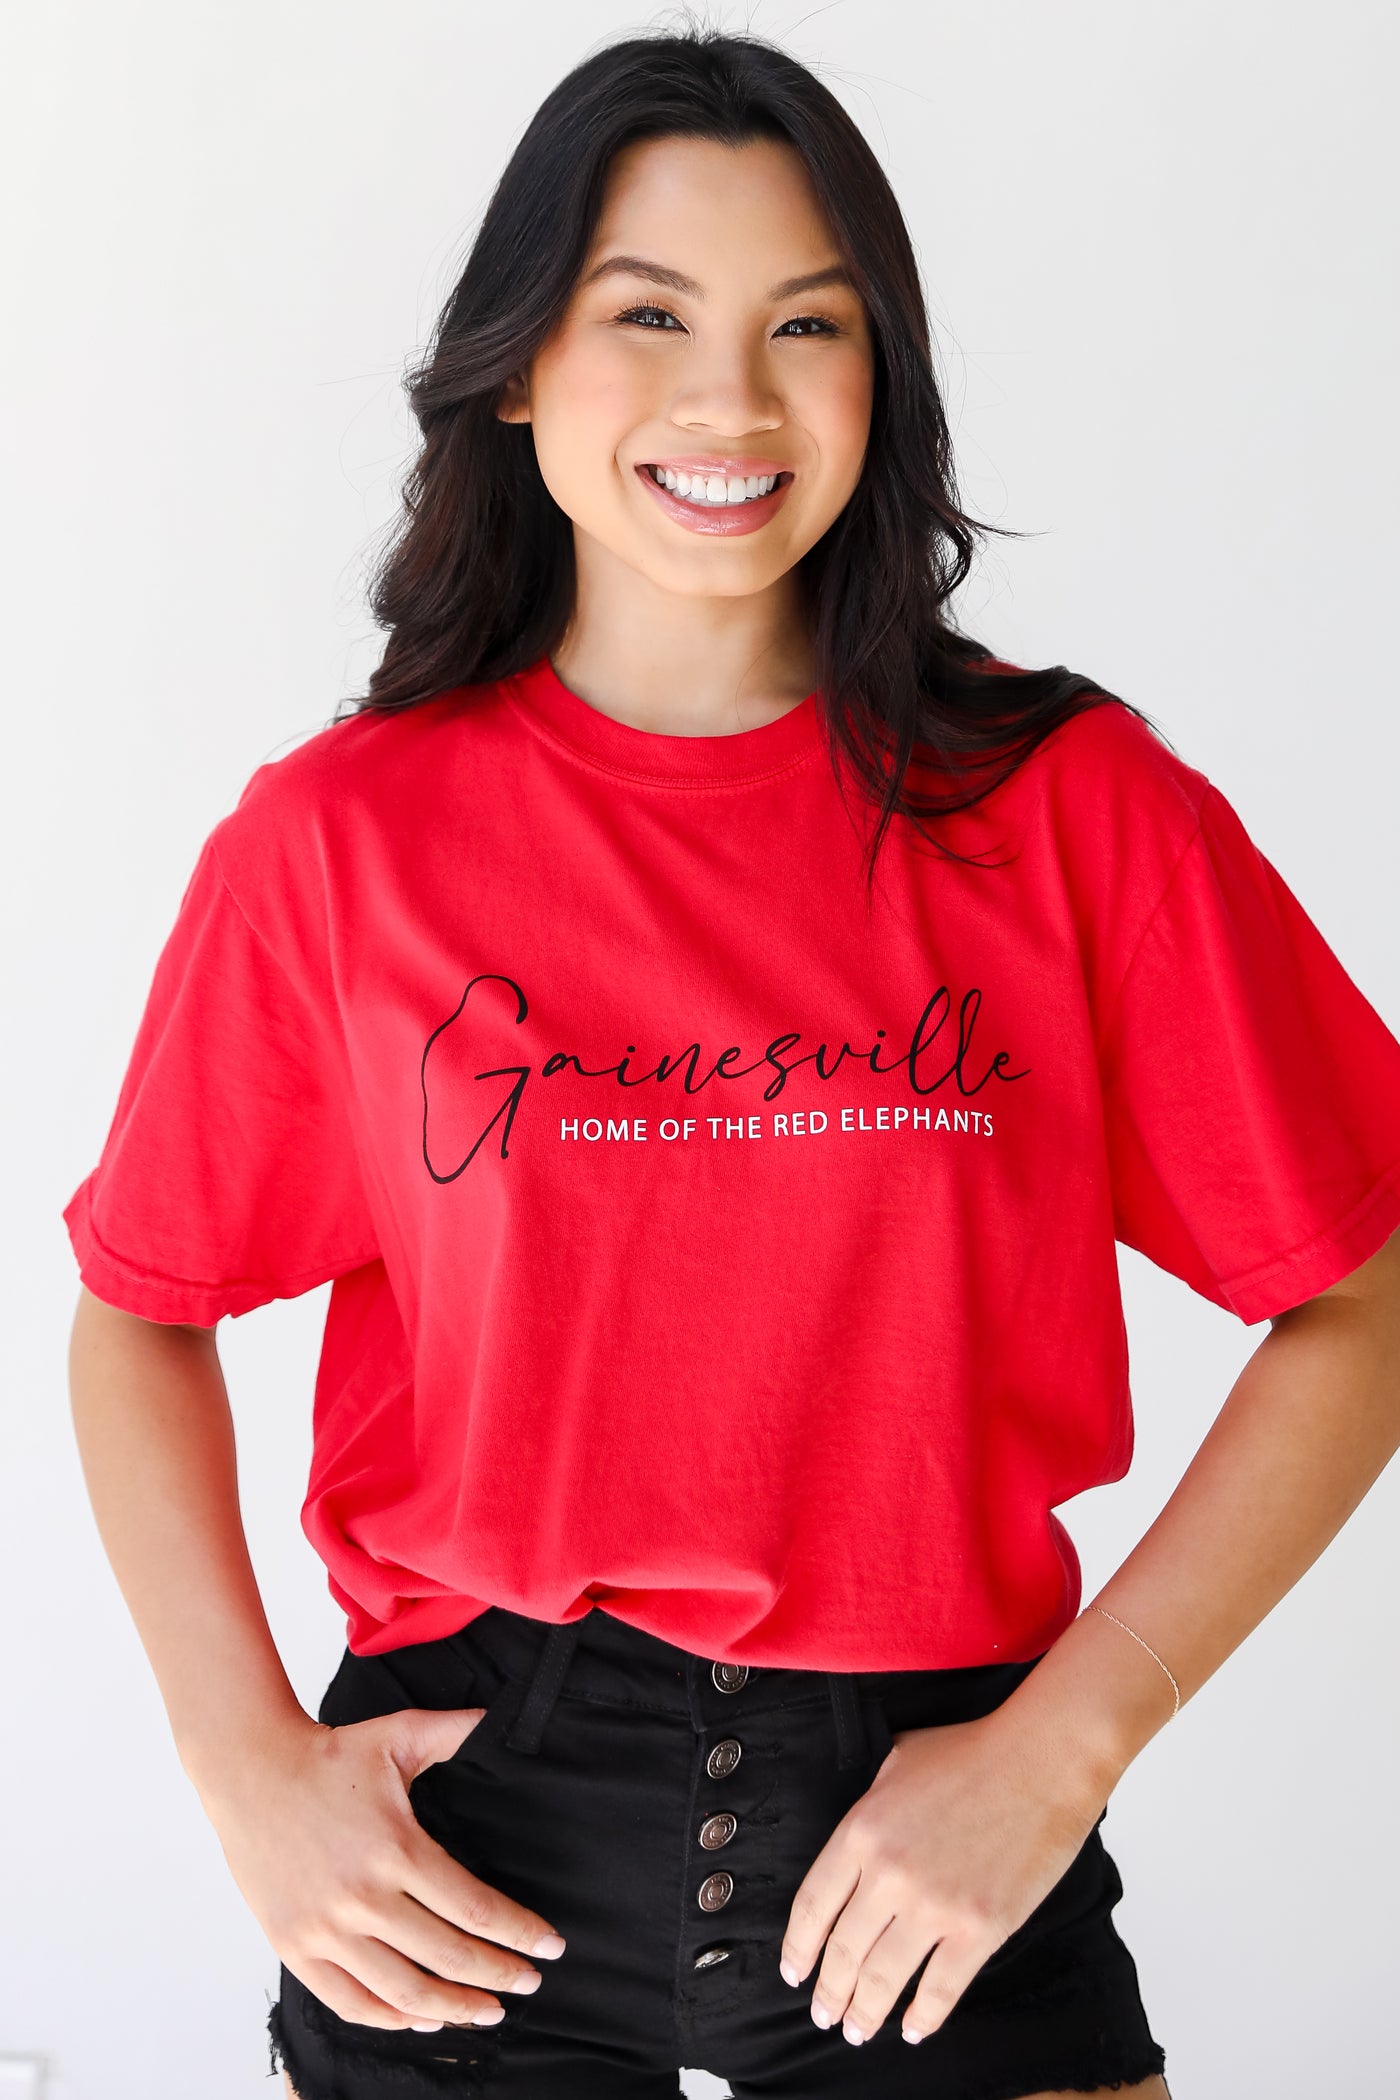 Gainesville Home Of The Red Elephants Tee on model